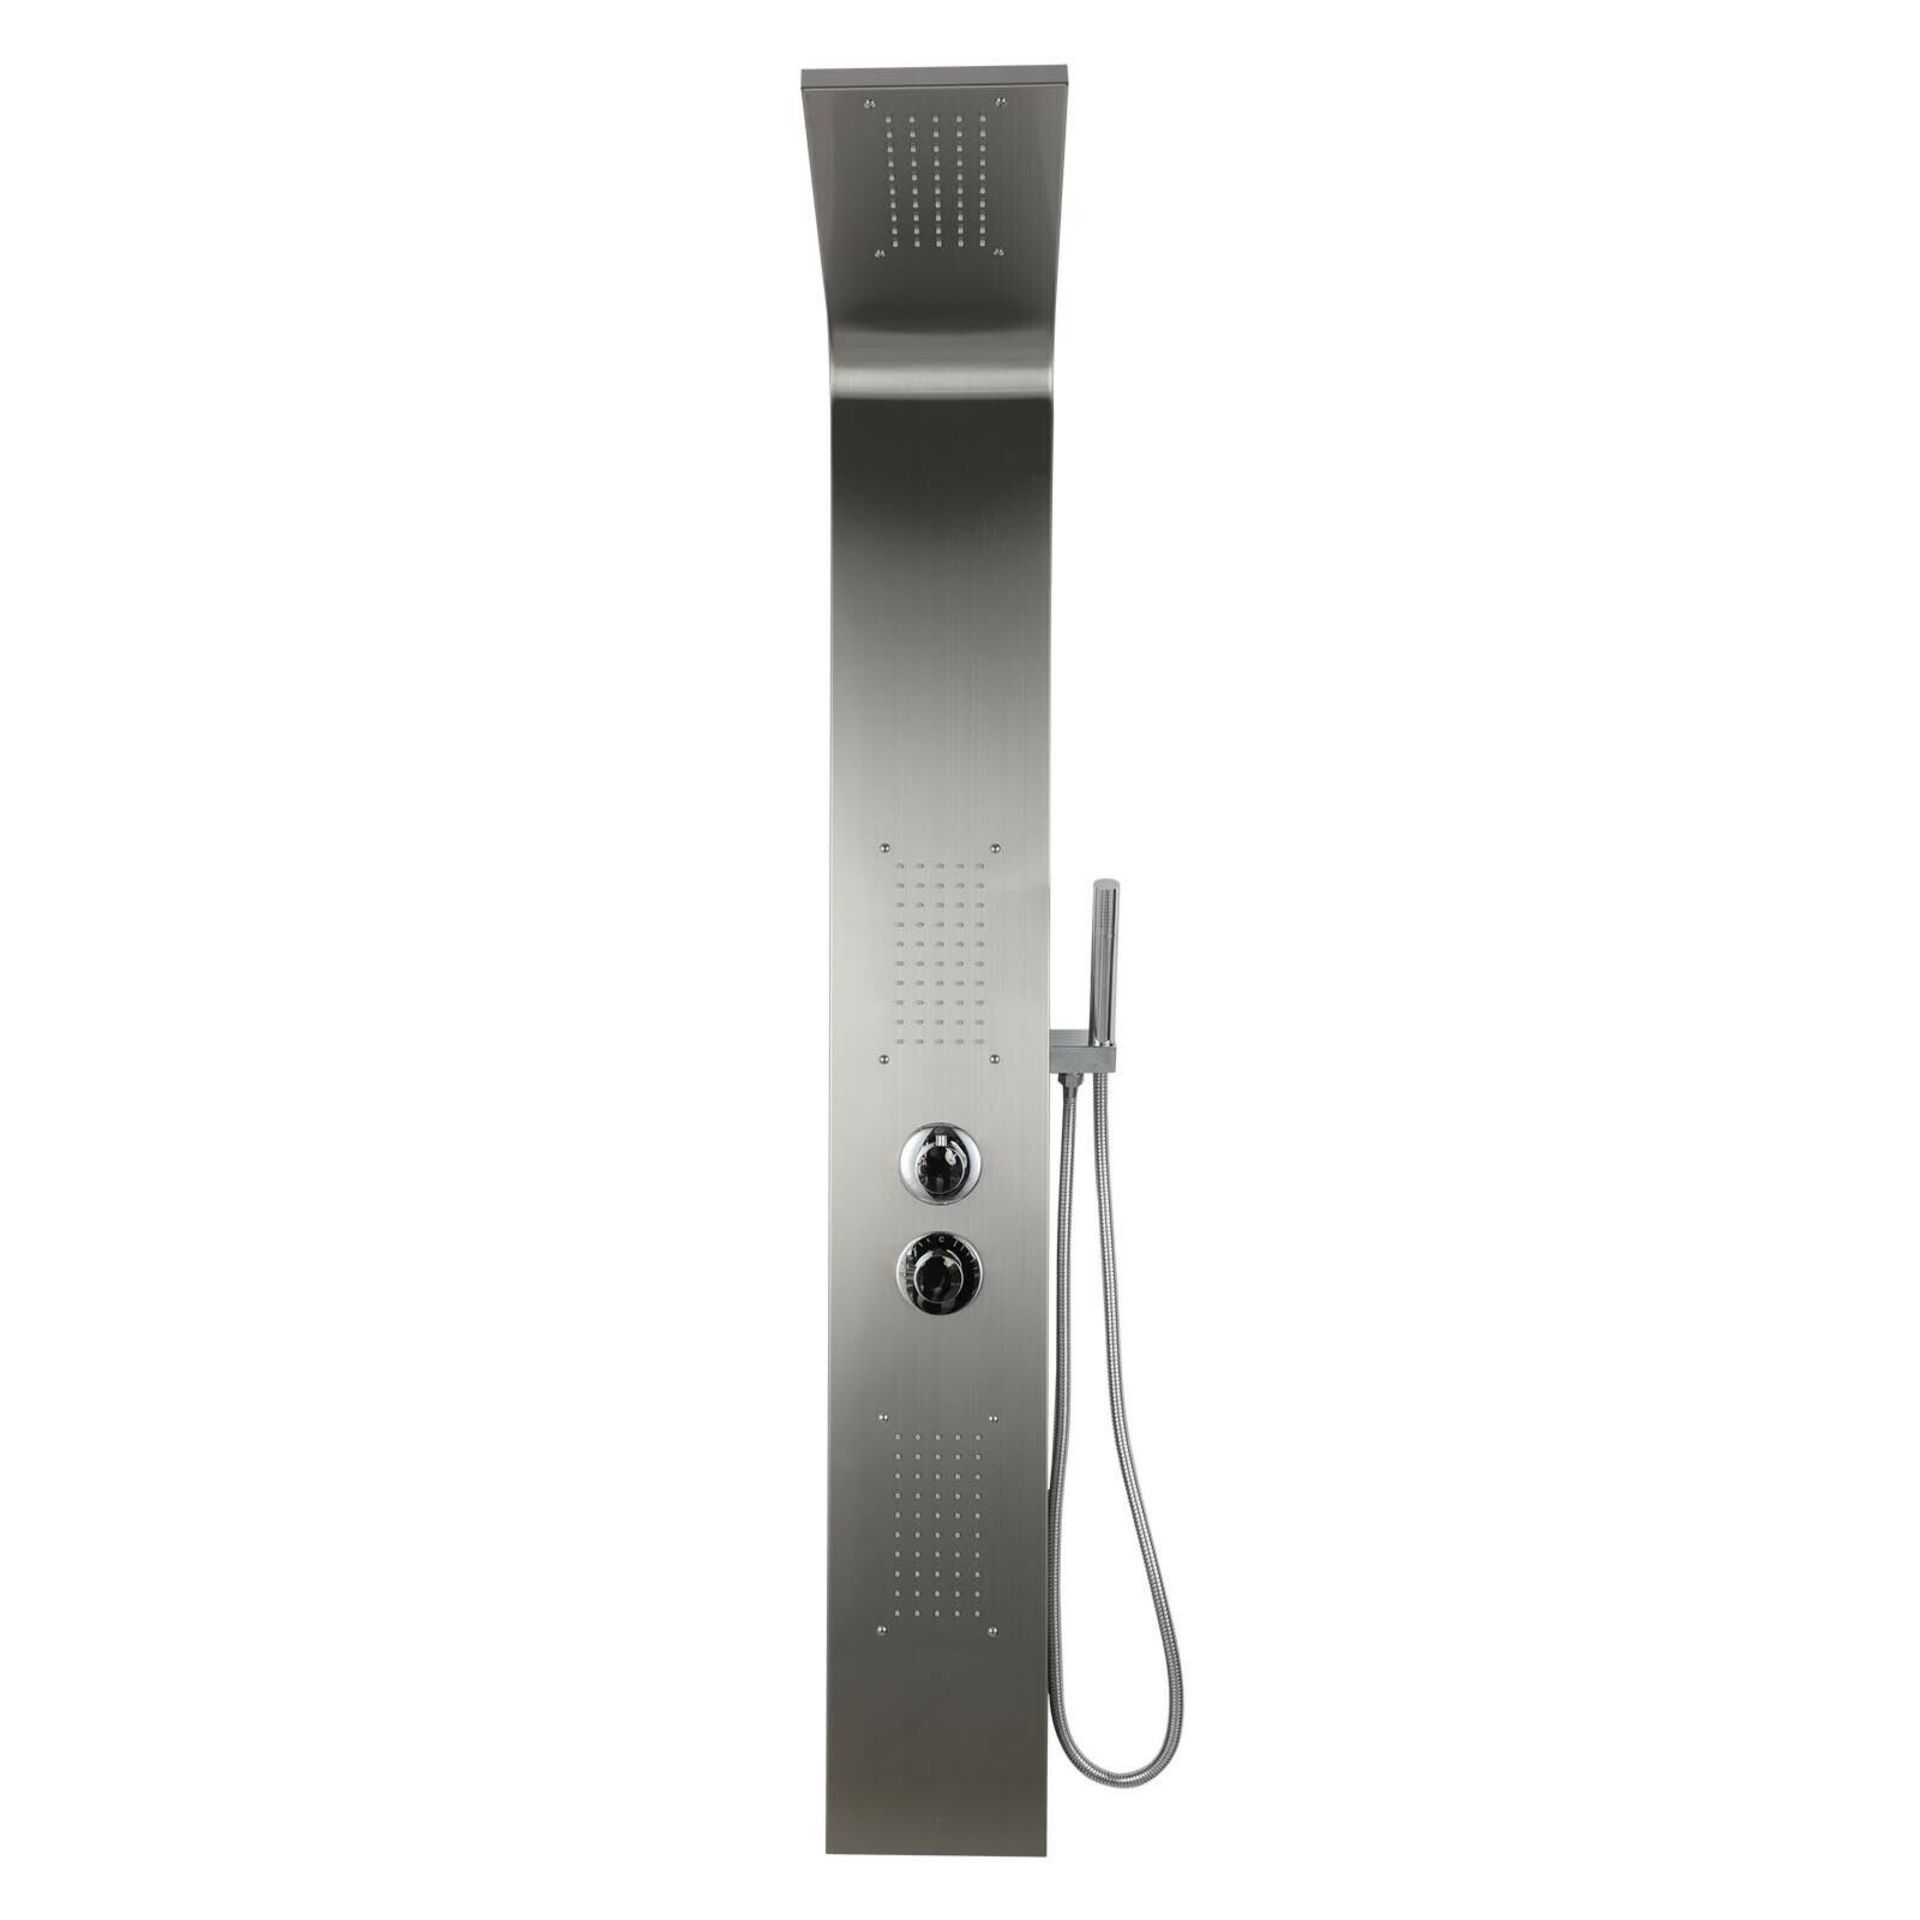 New & Boxed Chrome Modern Bathroom Shower Column Tower Panel System With Hand Held Massage Jets... - Image 3 of 3